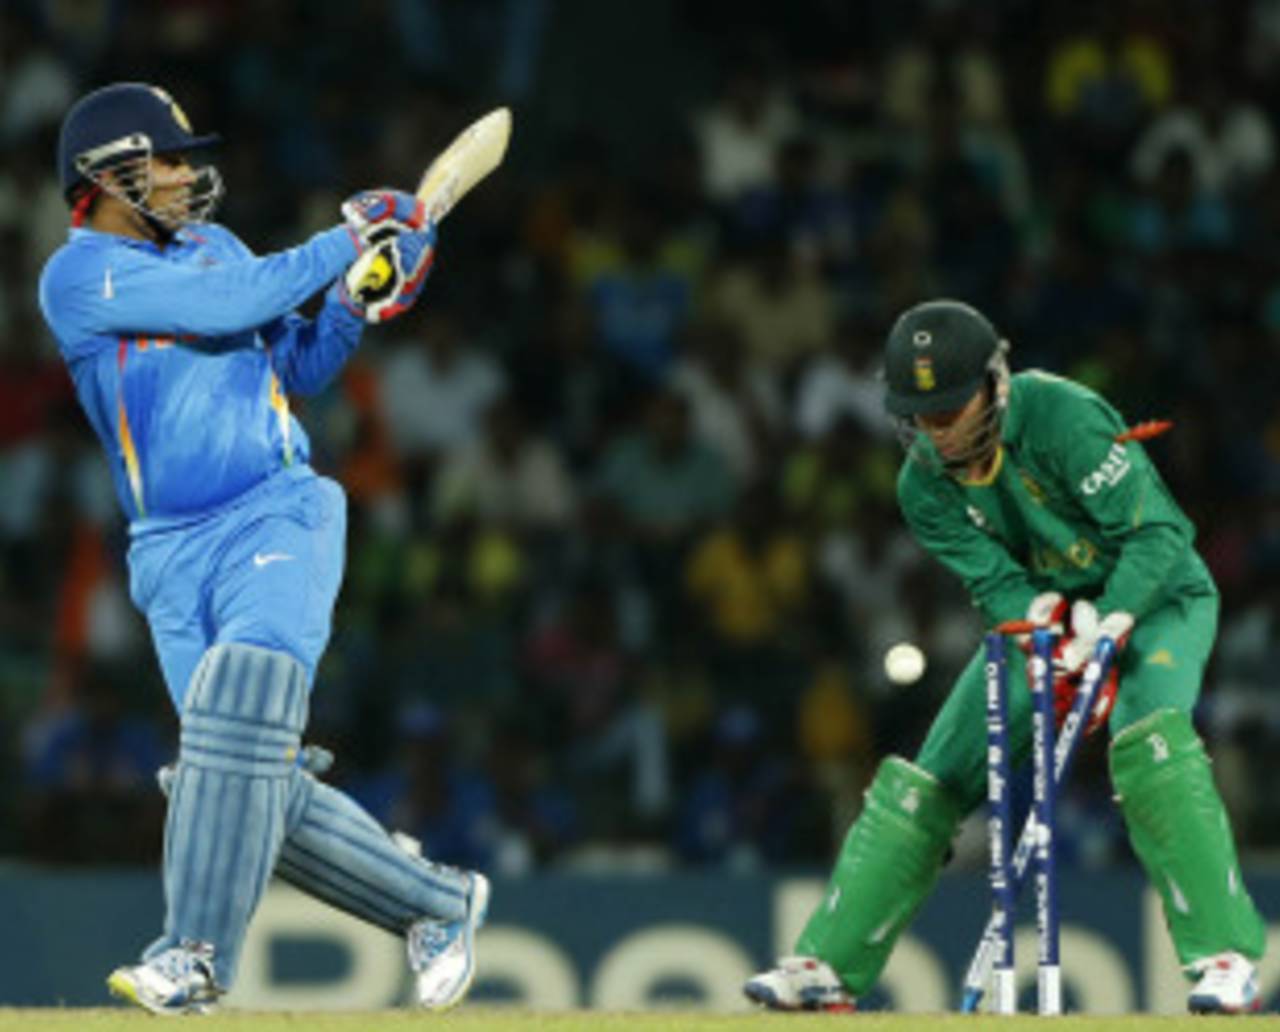 Virender Sehwag looks back to see his stumps disturbed after attempting a wild shot&nbsp;&nbsp;&bull;&nbsp;&nbsp;Associated Press